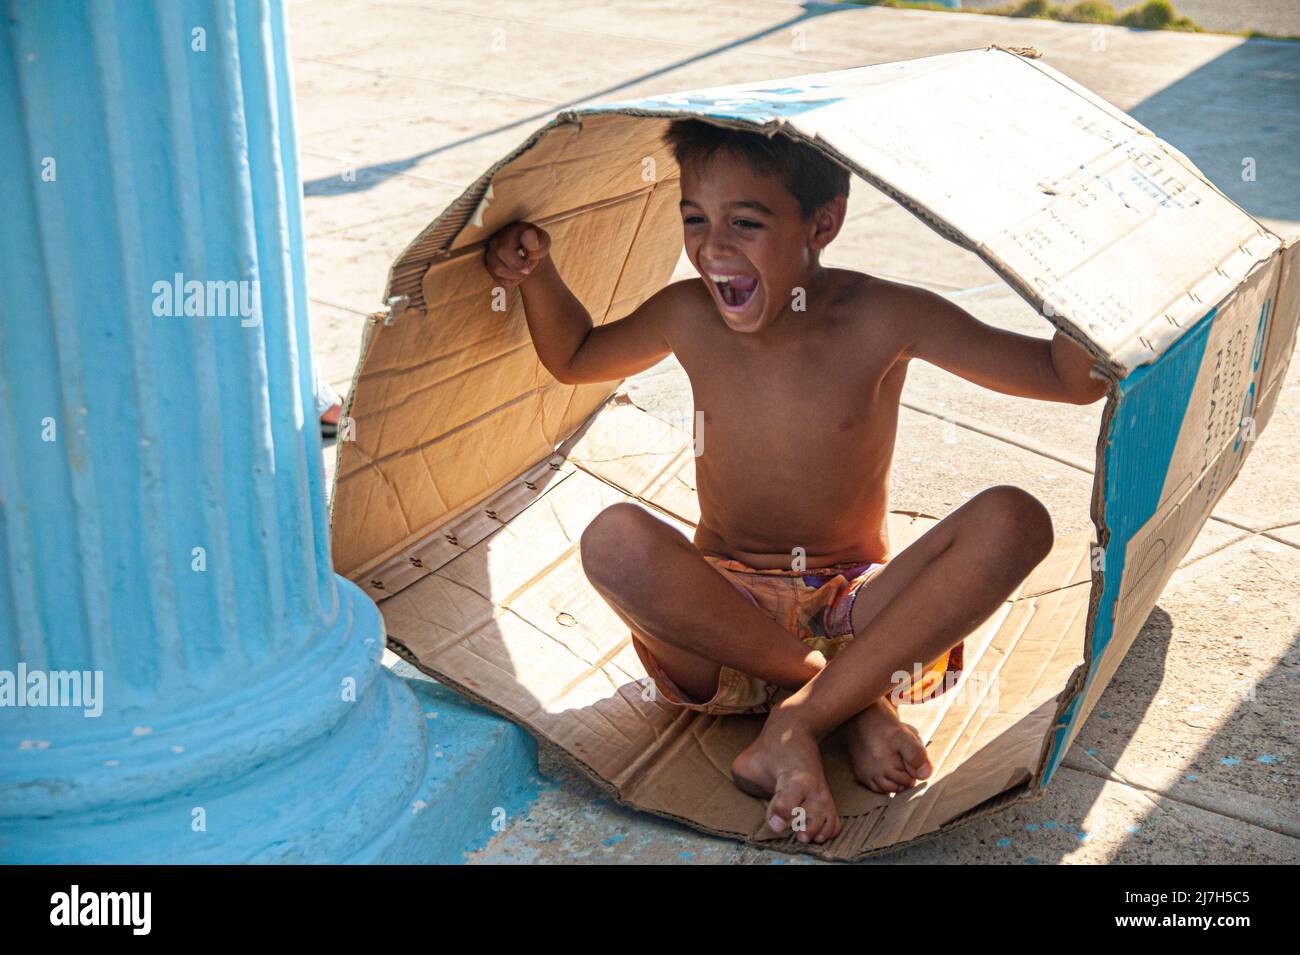 Young barefoot boy laughing while playing in a paper box in Havana, Cuba. Stock Photo